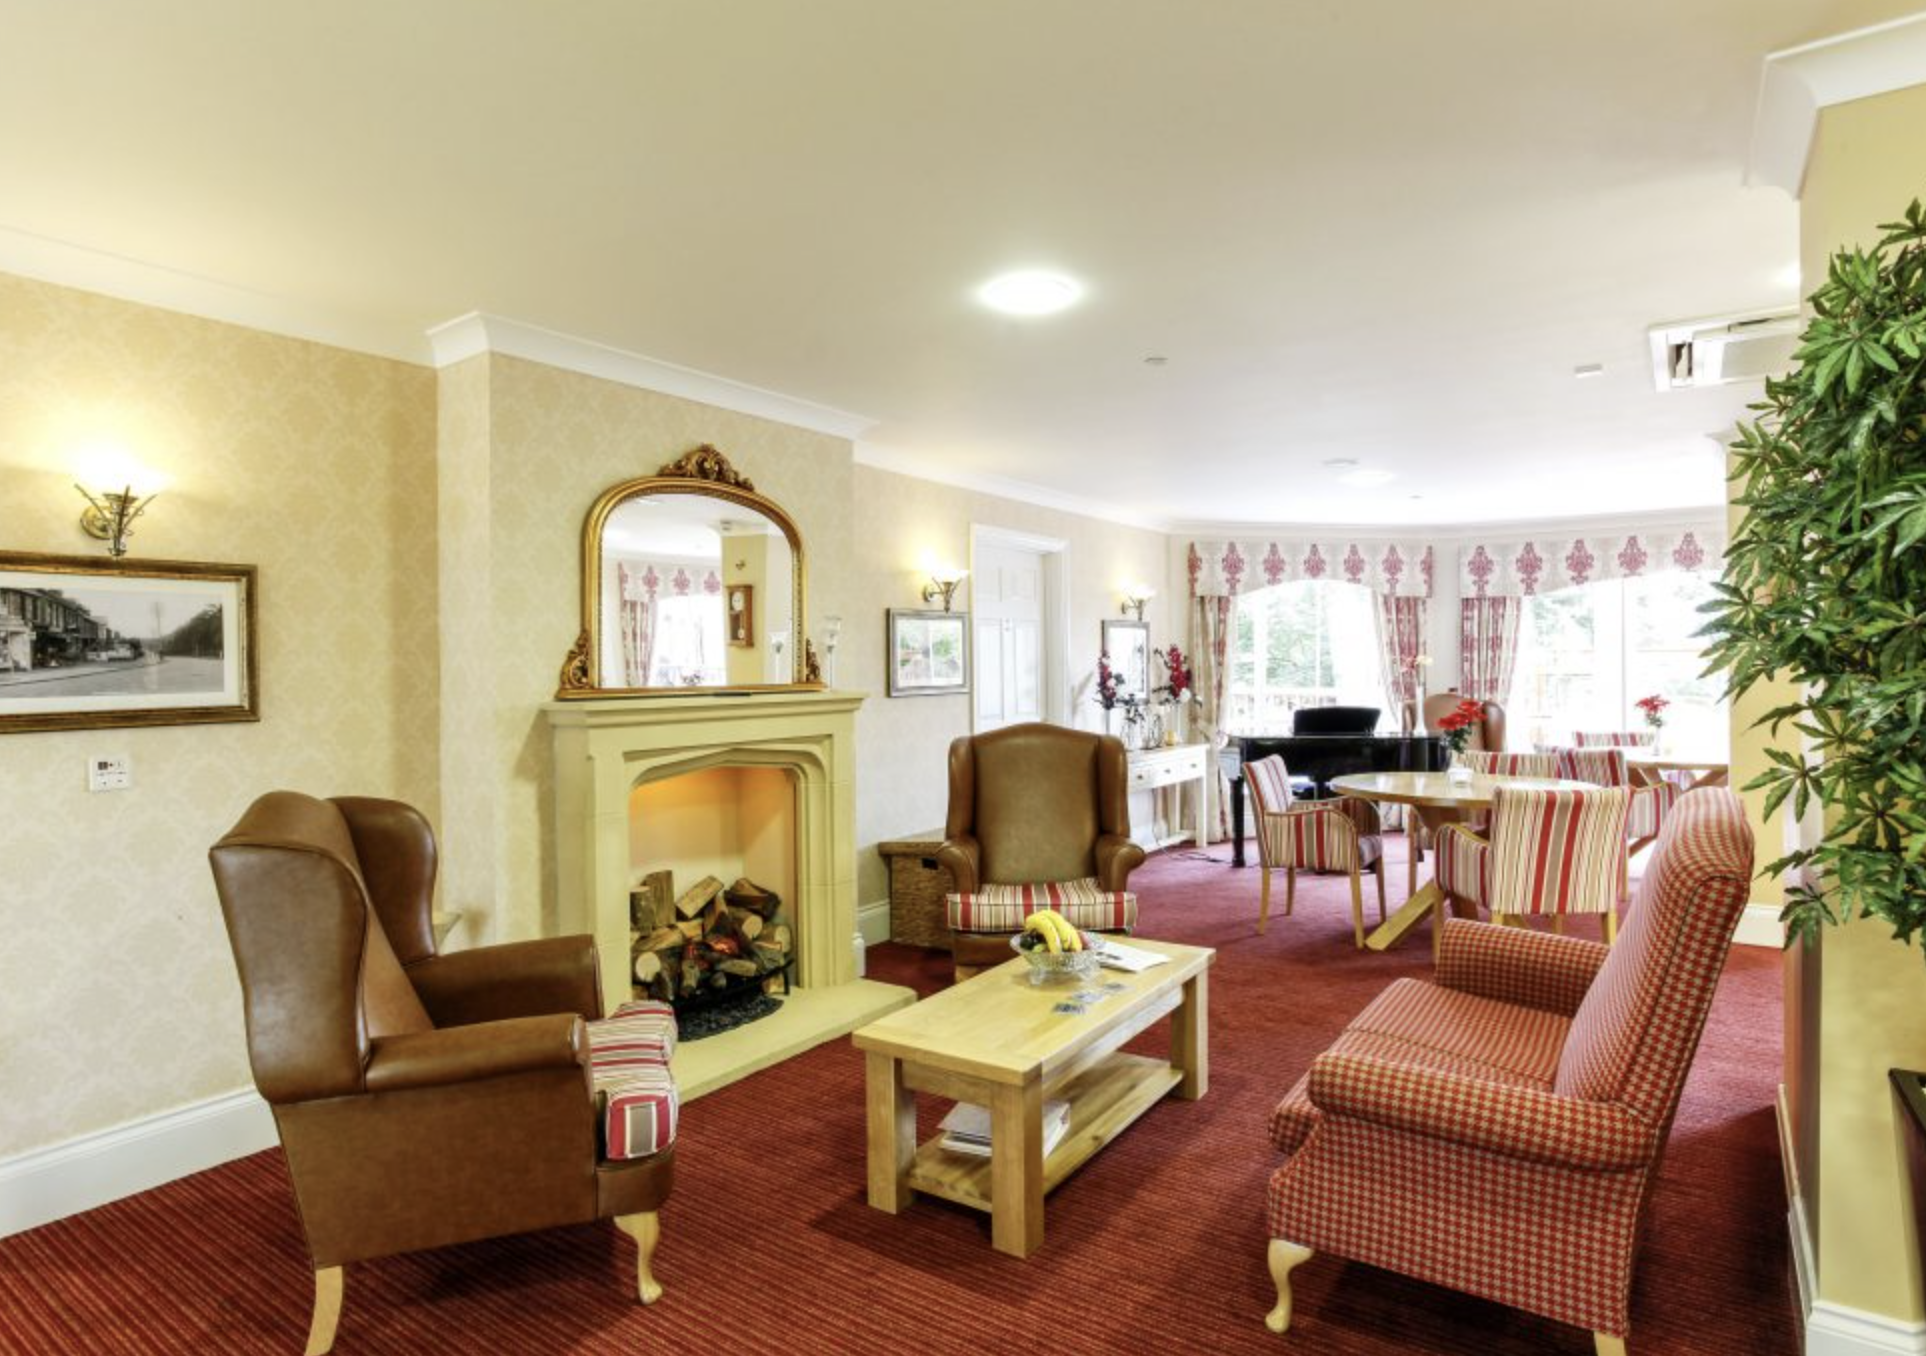 Lounge of Cooperscroft care home in Potters Bar, Hertfordshire